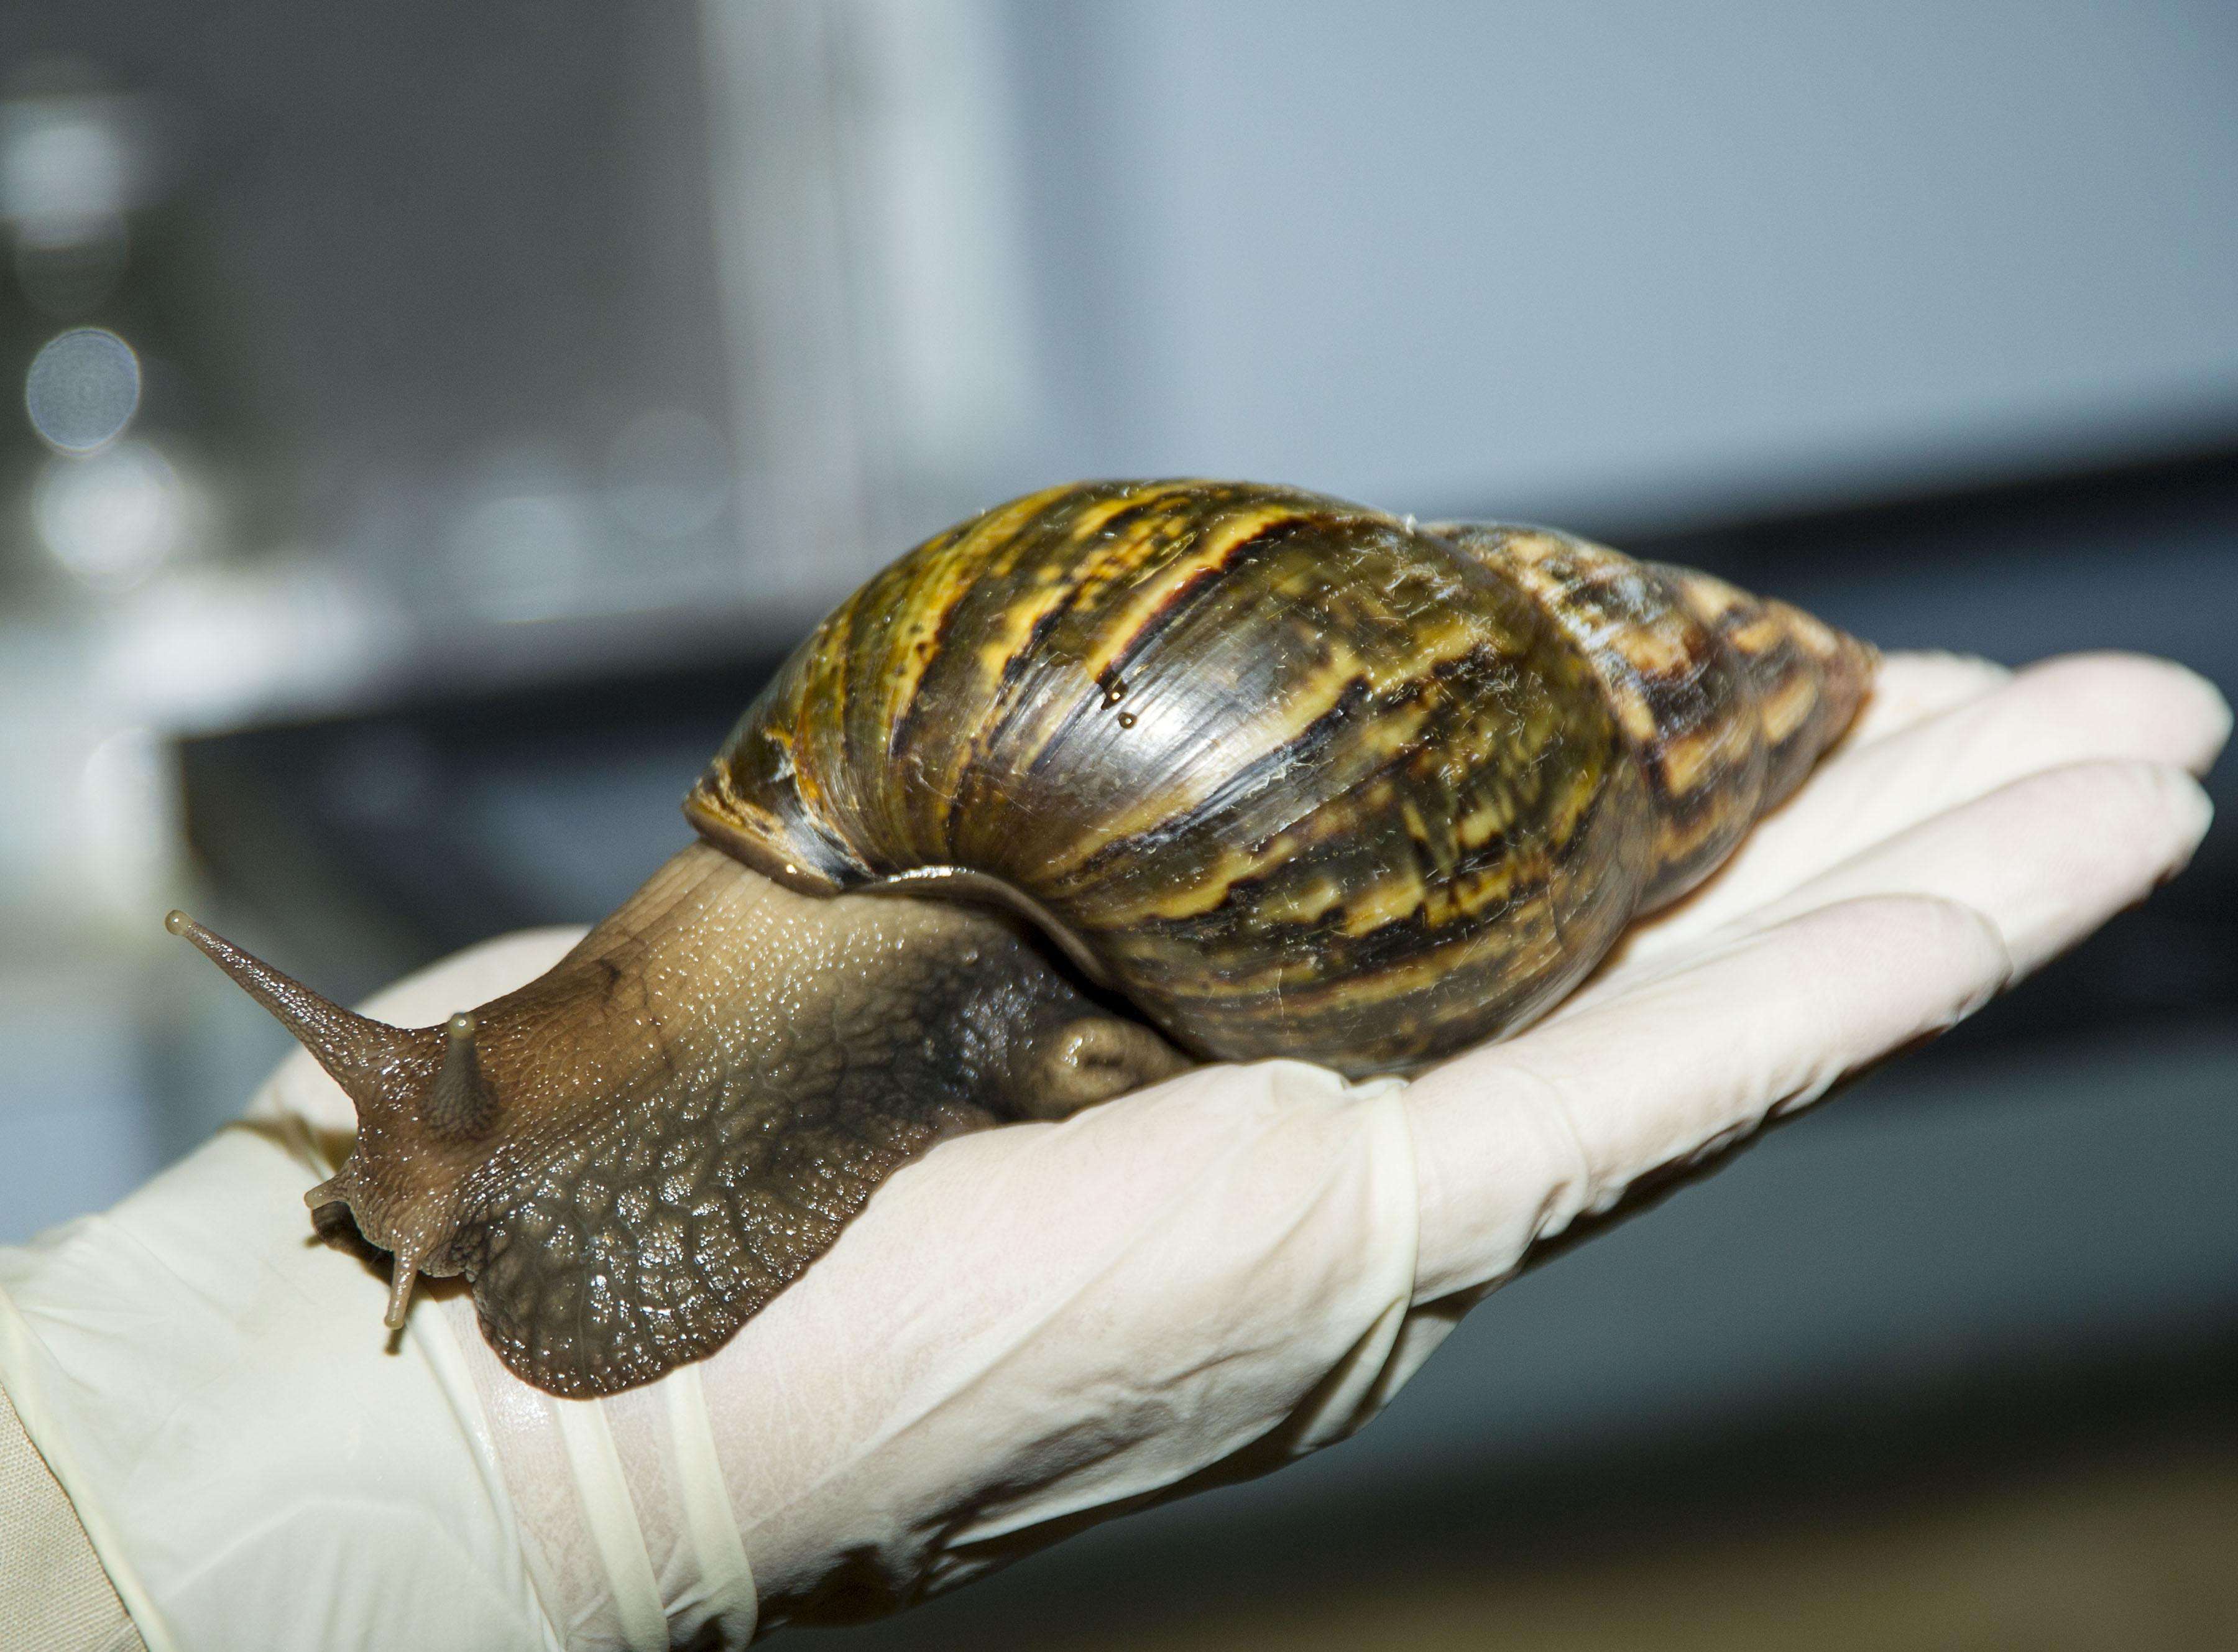 Large brown snail, approximately 8 inches in length, that has a dark brown shell with lighter brown vertical stripes sitting on a gloved hand. 